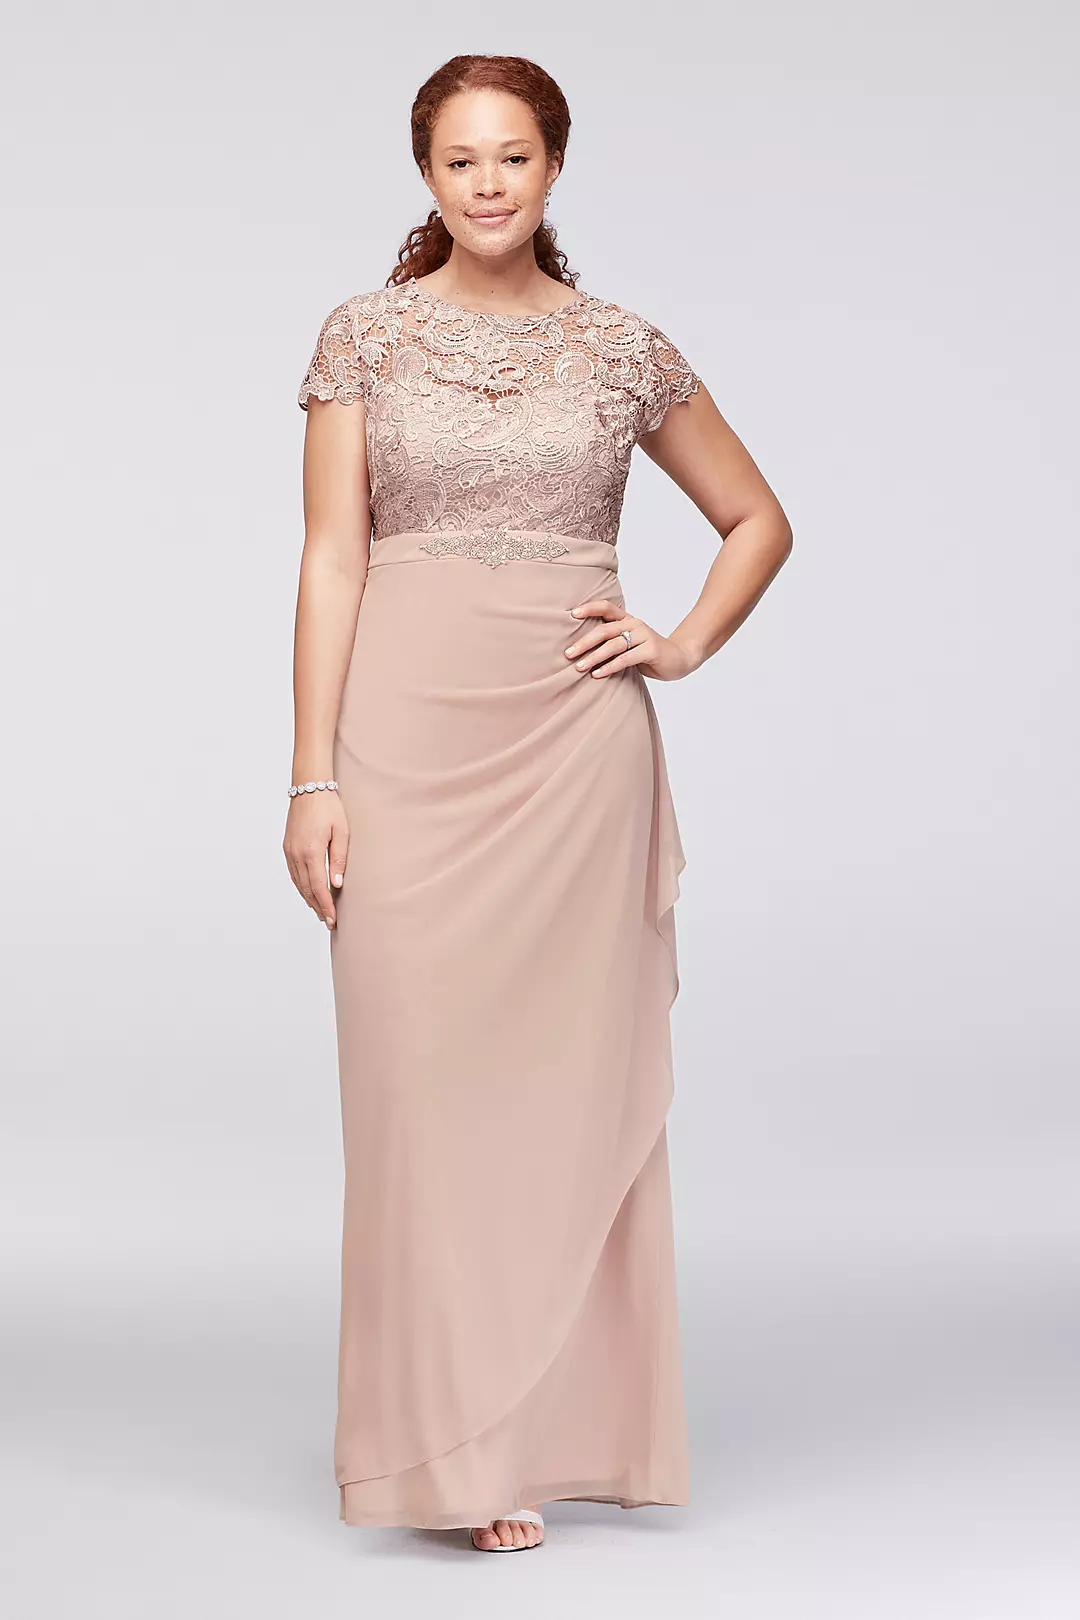 Lace and Ruched Mesh Dress with Beaded Waist Image